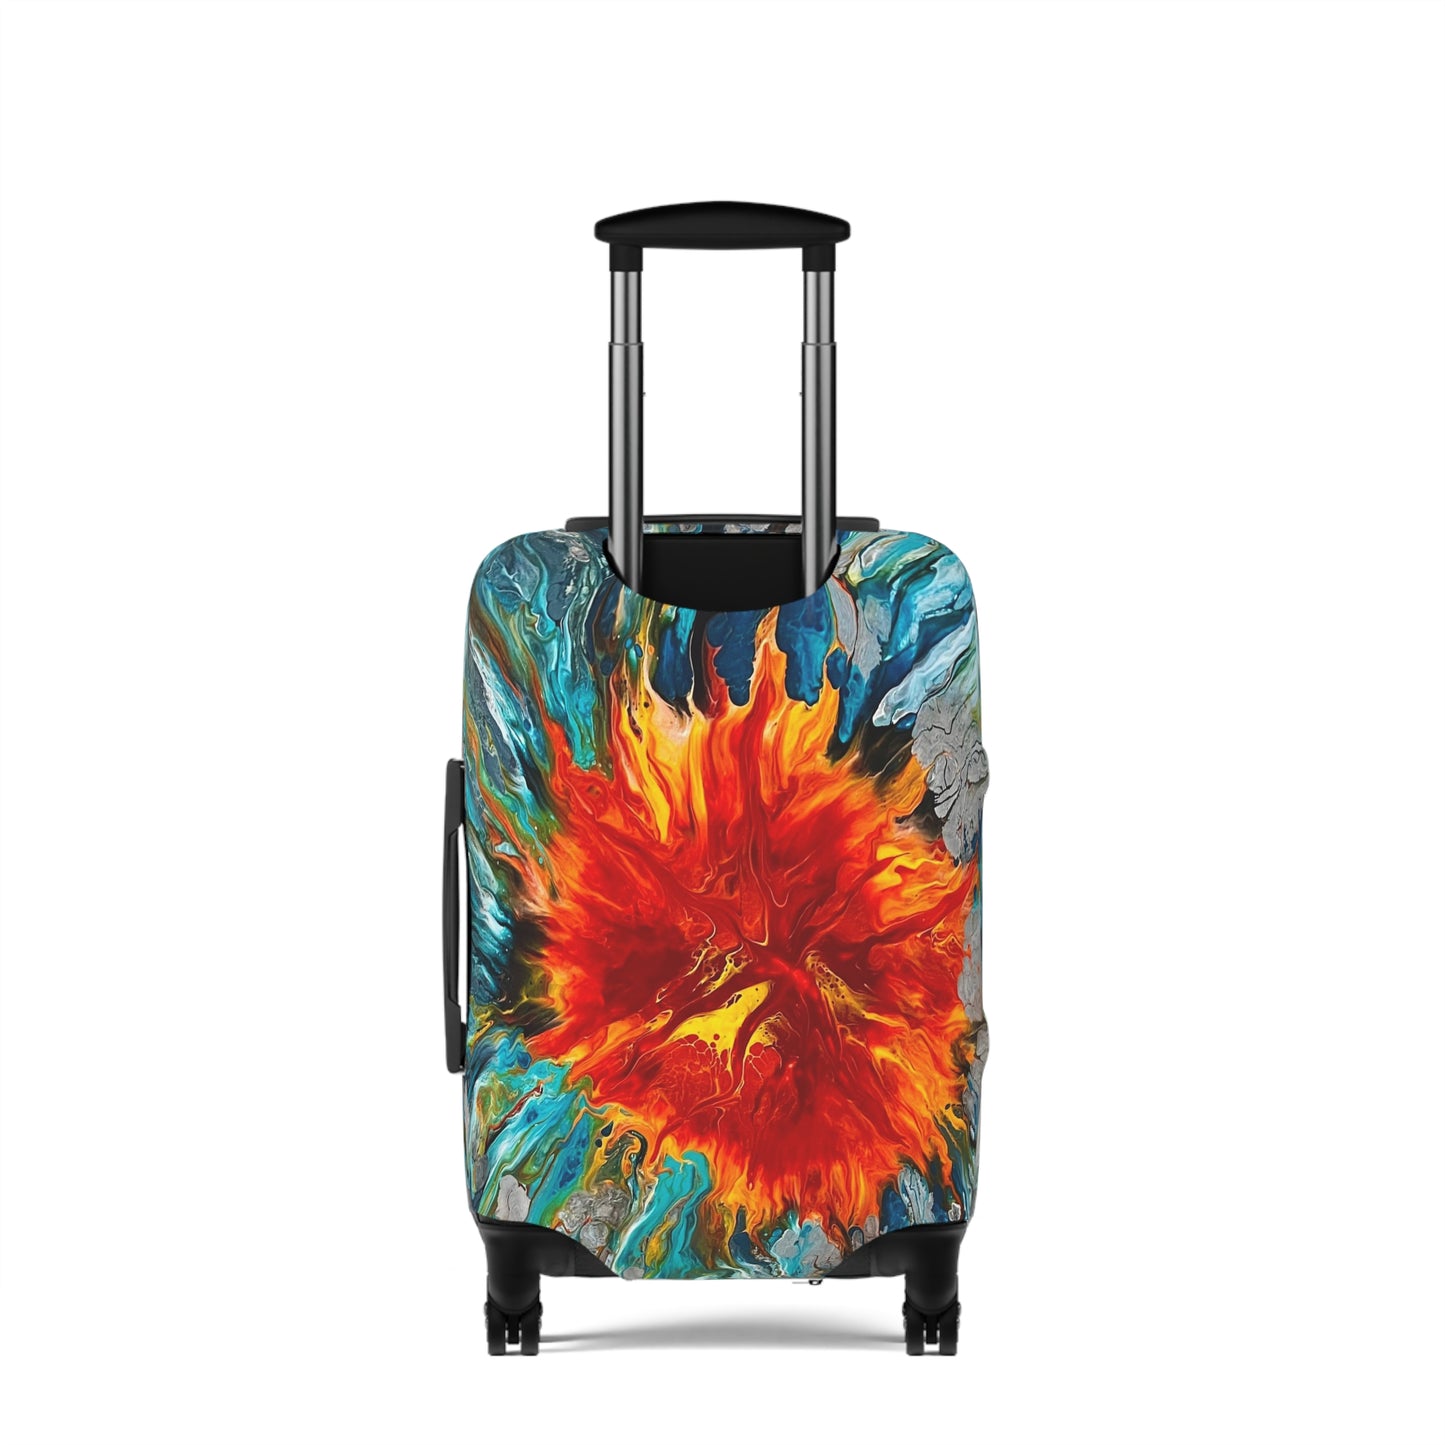 Fire and Water Individualized Carry On Suitcase/Luggage Cover